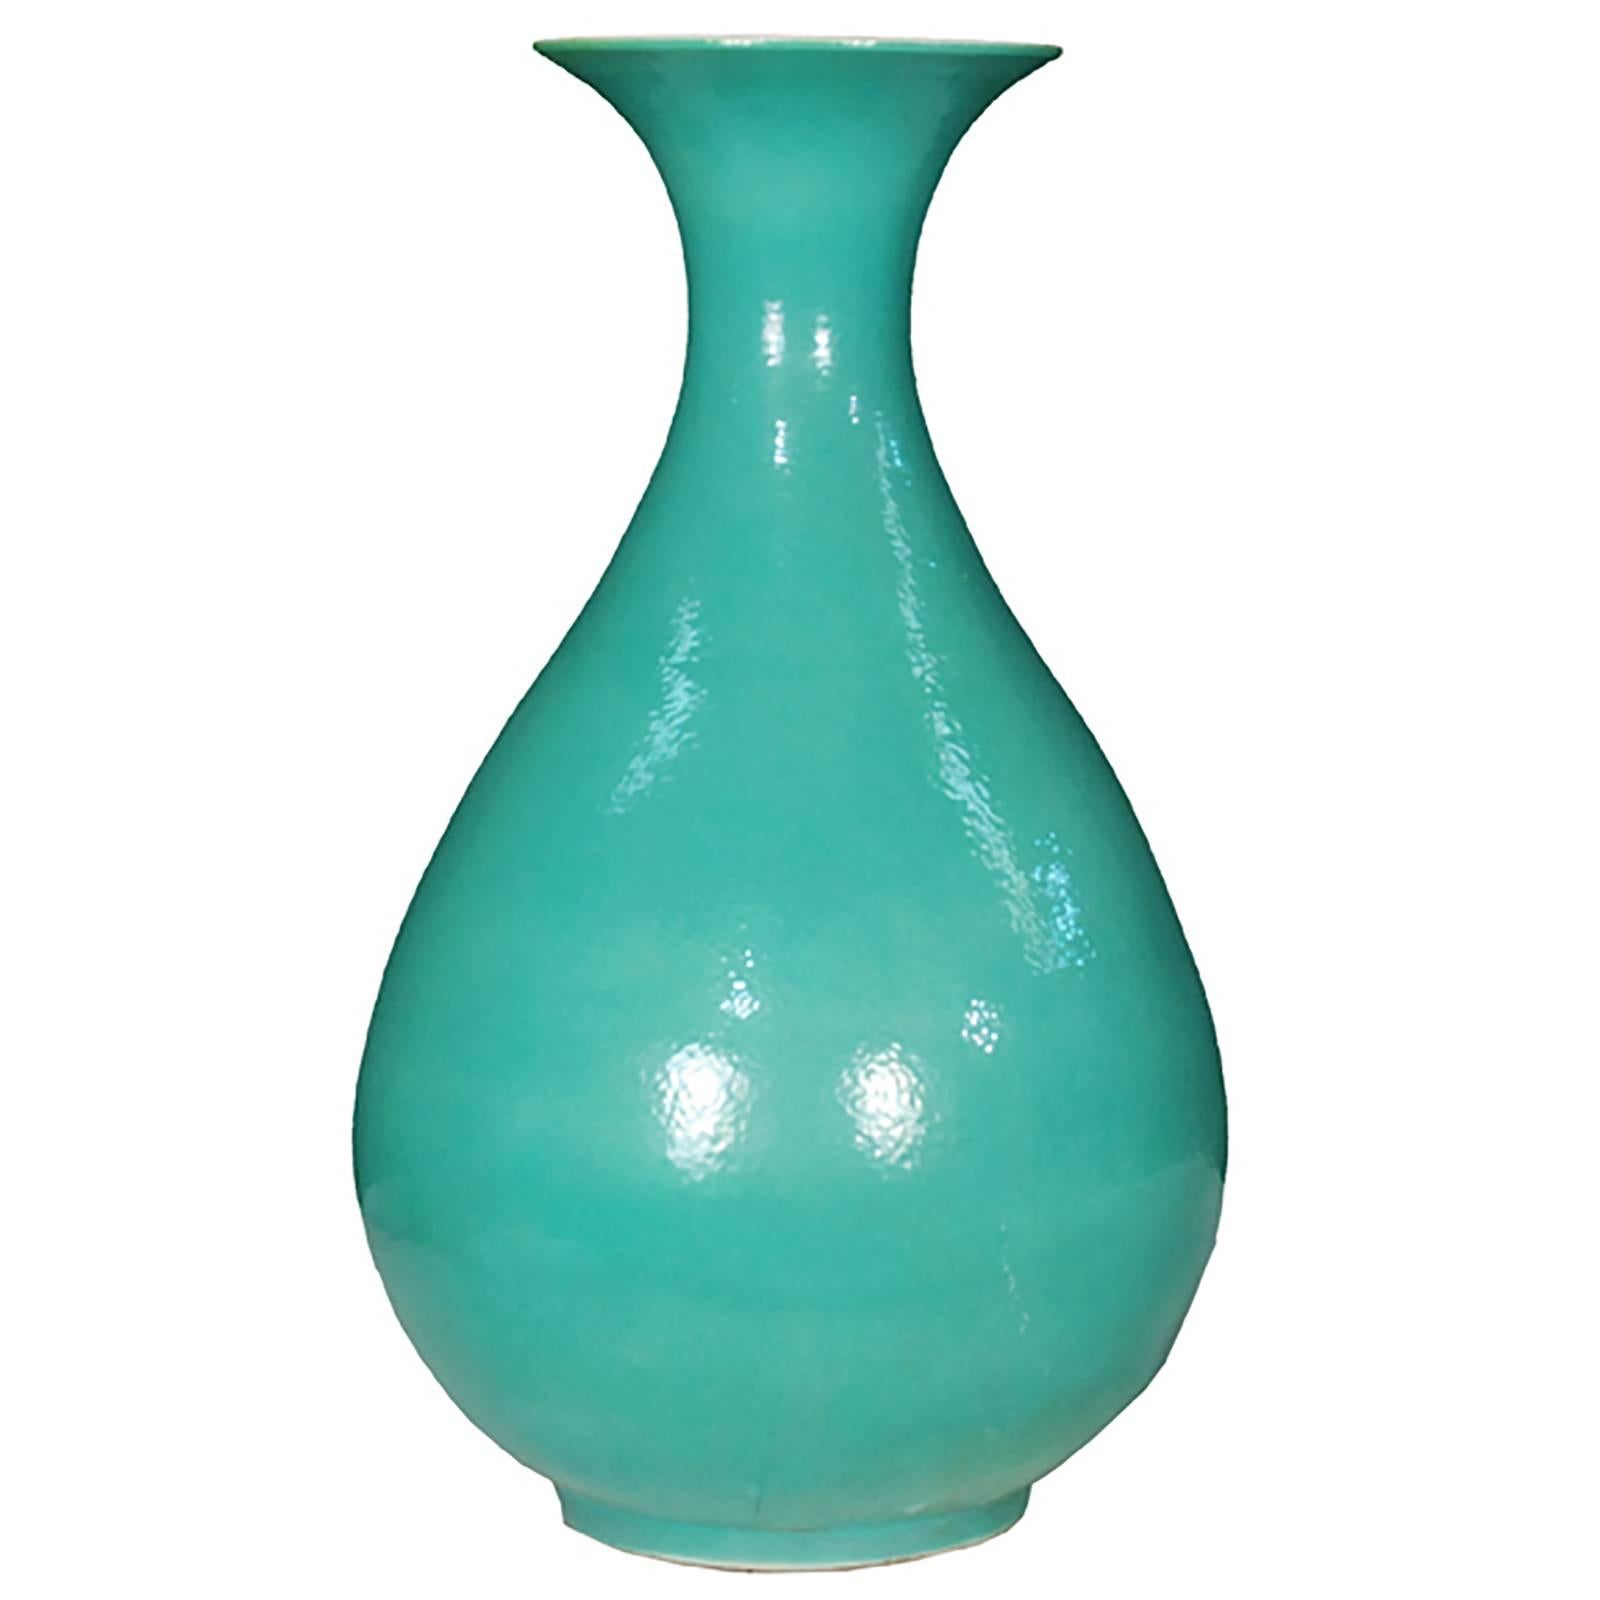 The striking monochrome of this vase draws on a long Chinese tradition of ceramics glazed in a single, statement-making color. In the 19th century, Chinese artisans revived the art of blue and green glazes resulting in this rich turquoise. The